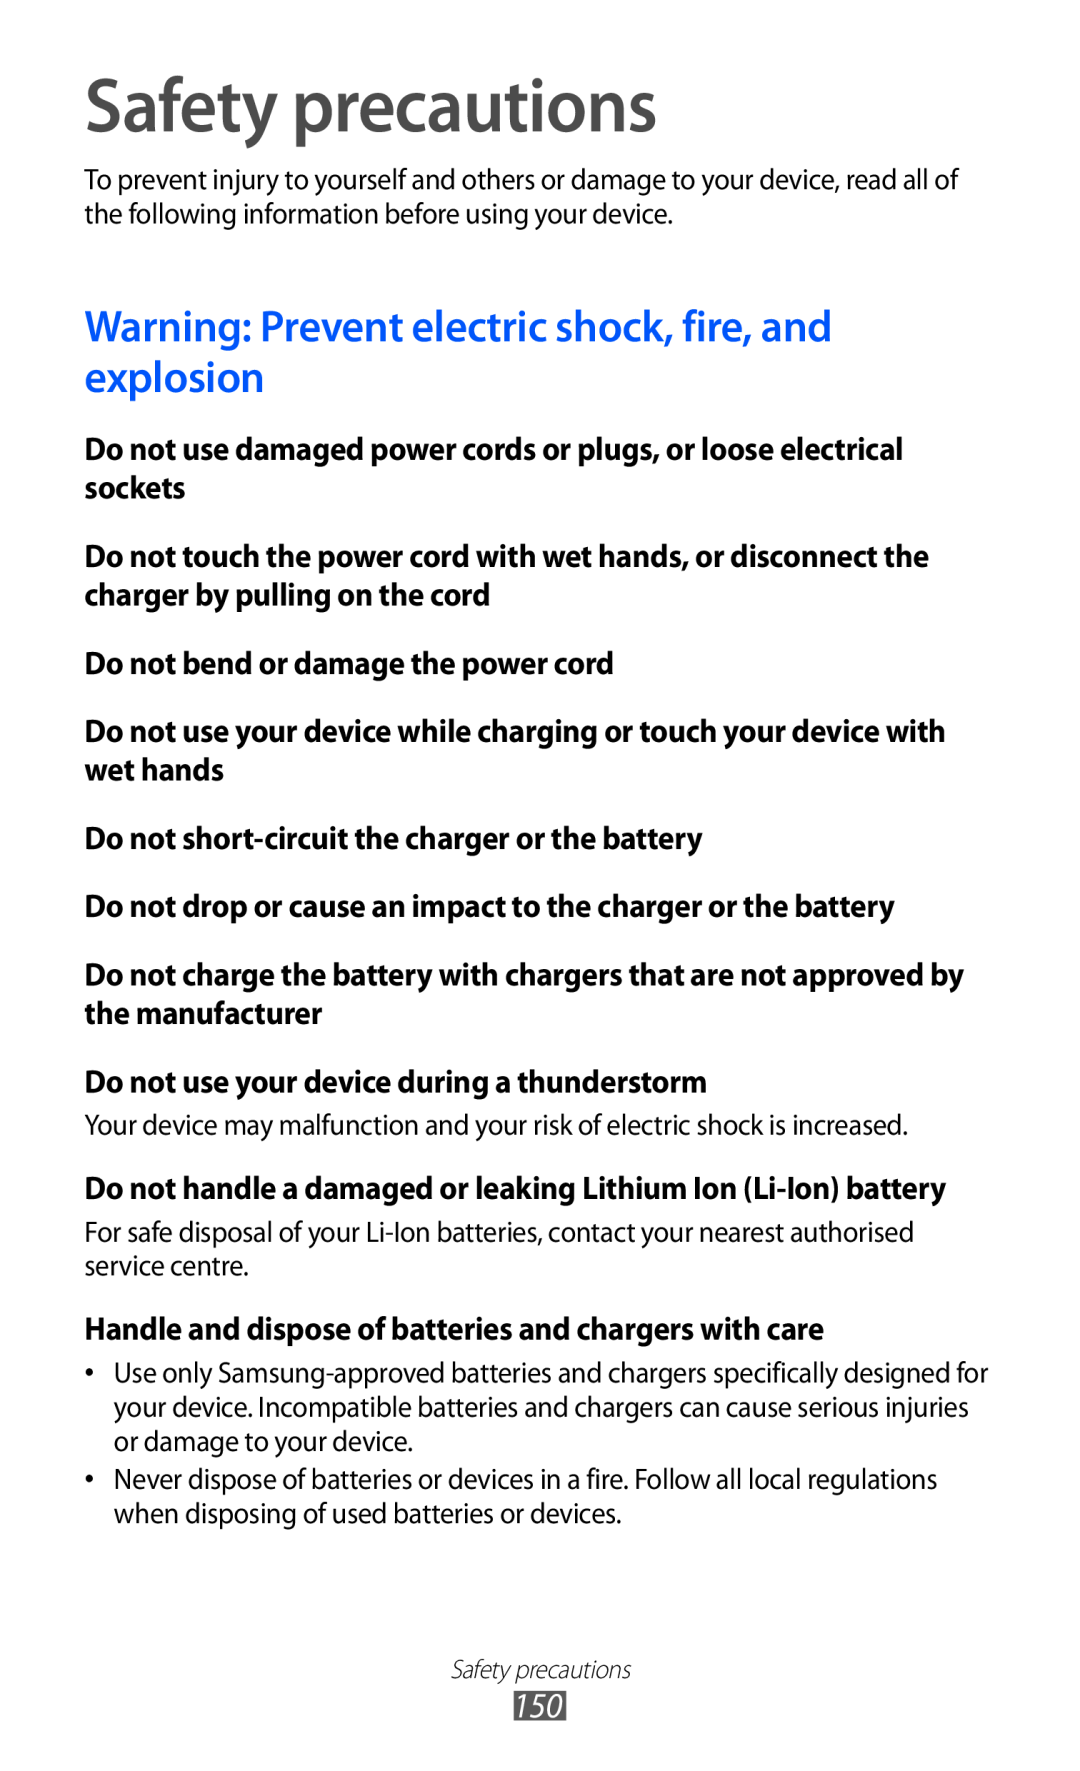 Samsung GT-I9070MSAJED, GT-I9070RWAJED manual Safety precautions, Warning Prevent electric shock, fire, and explosion 